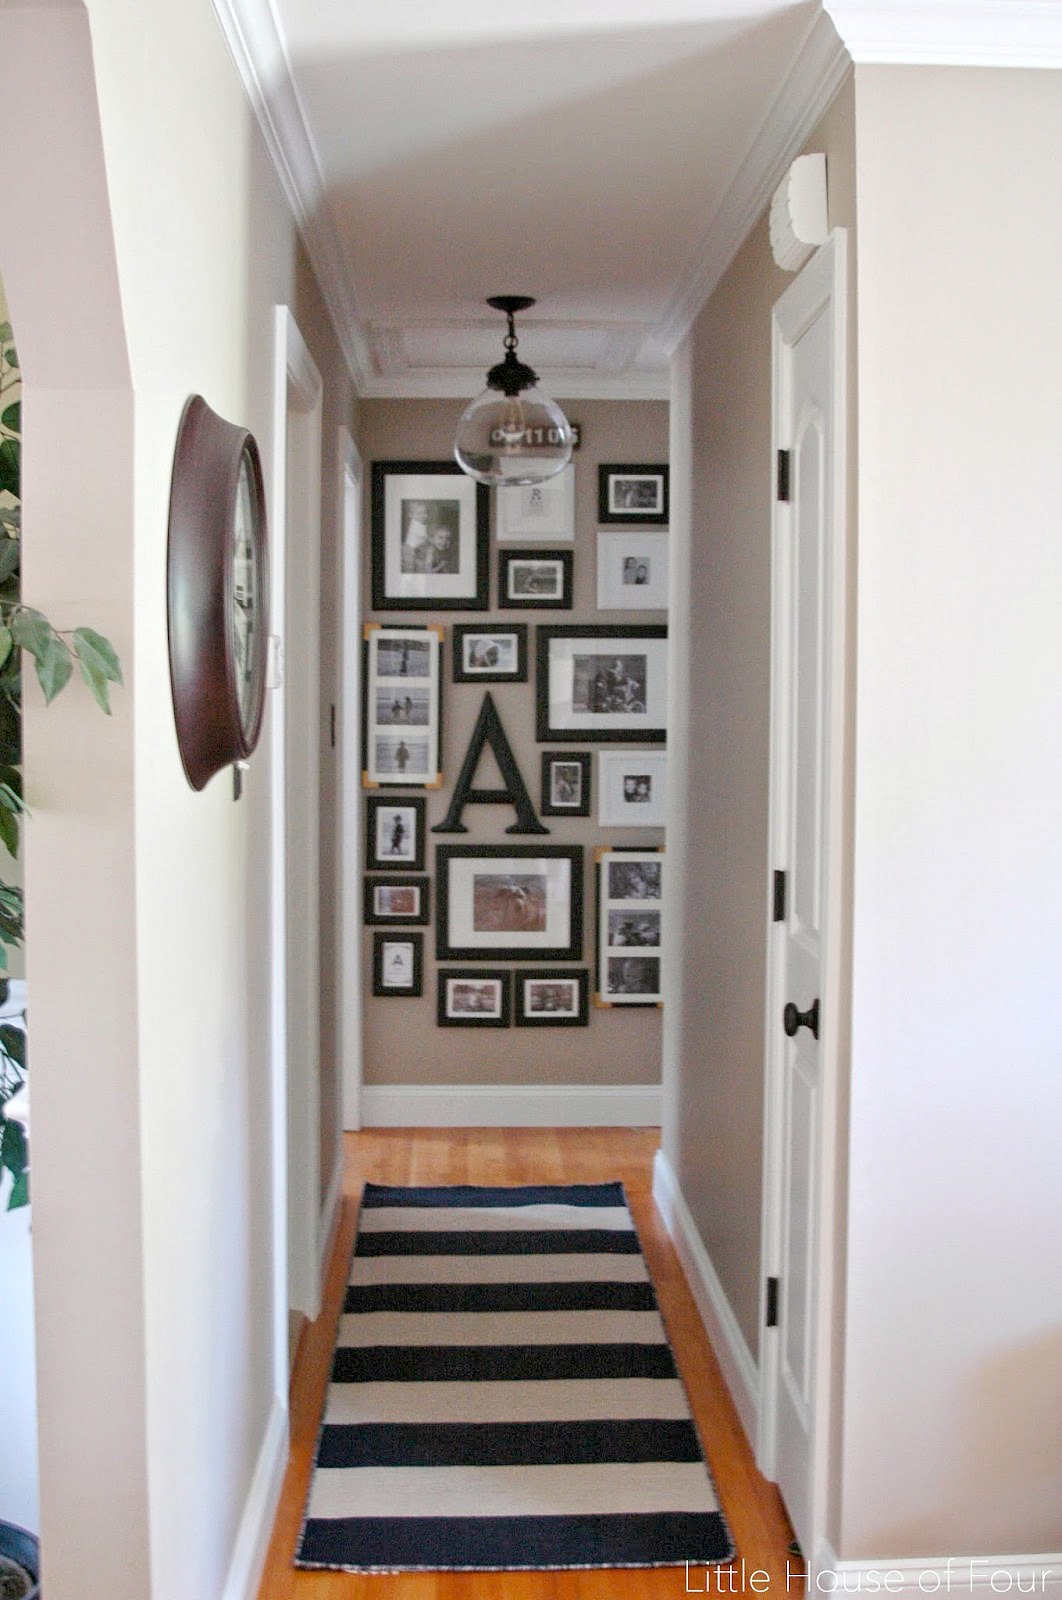 Updated Hall Gallery Wall | Little House of Four - Creating a beautiful